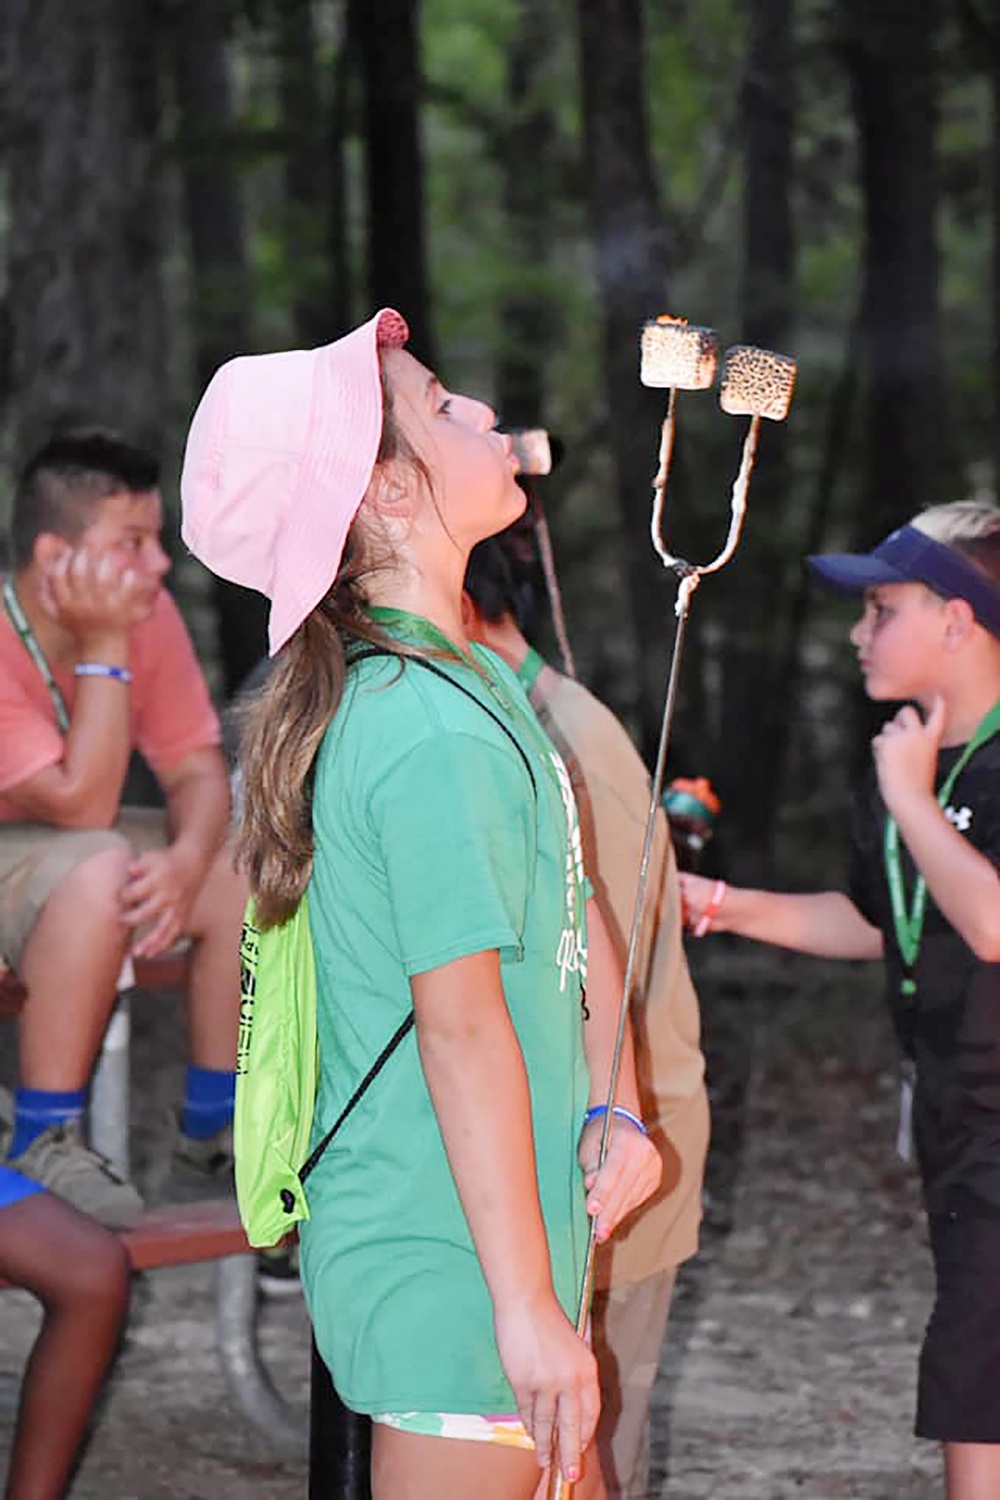 JRTC, Fort Polk’s Camp Warrior fosters youth leadership